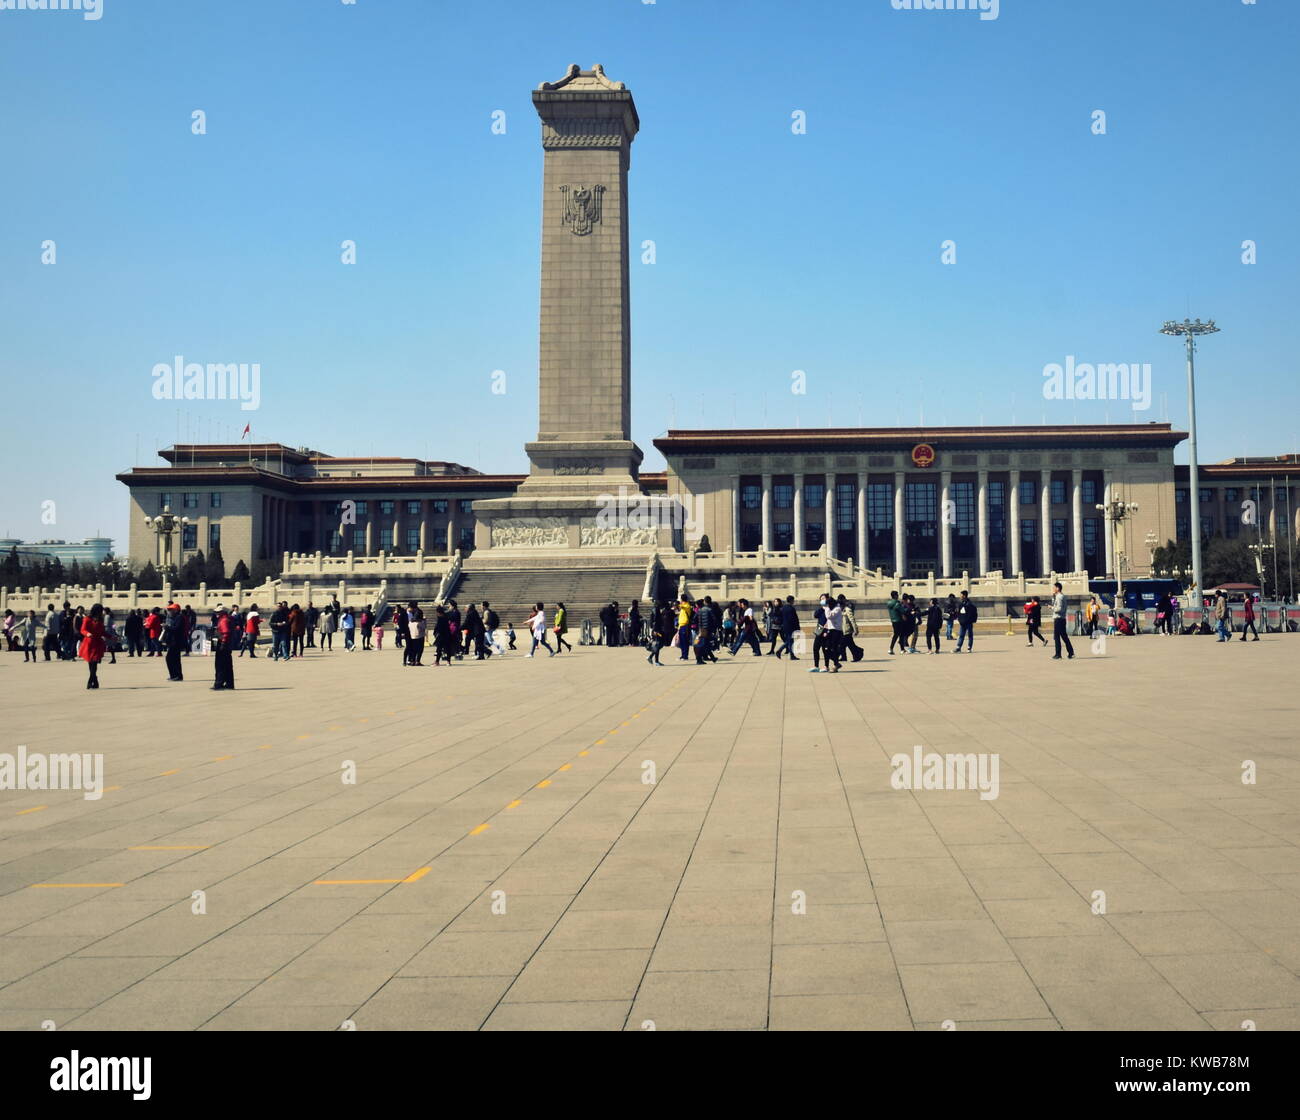 Tiananmen square in Beijing: People's Heroes monument and Great Hall of the People, Parliament and National Congress of the Communist Party of China Stock Photo